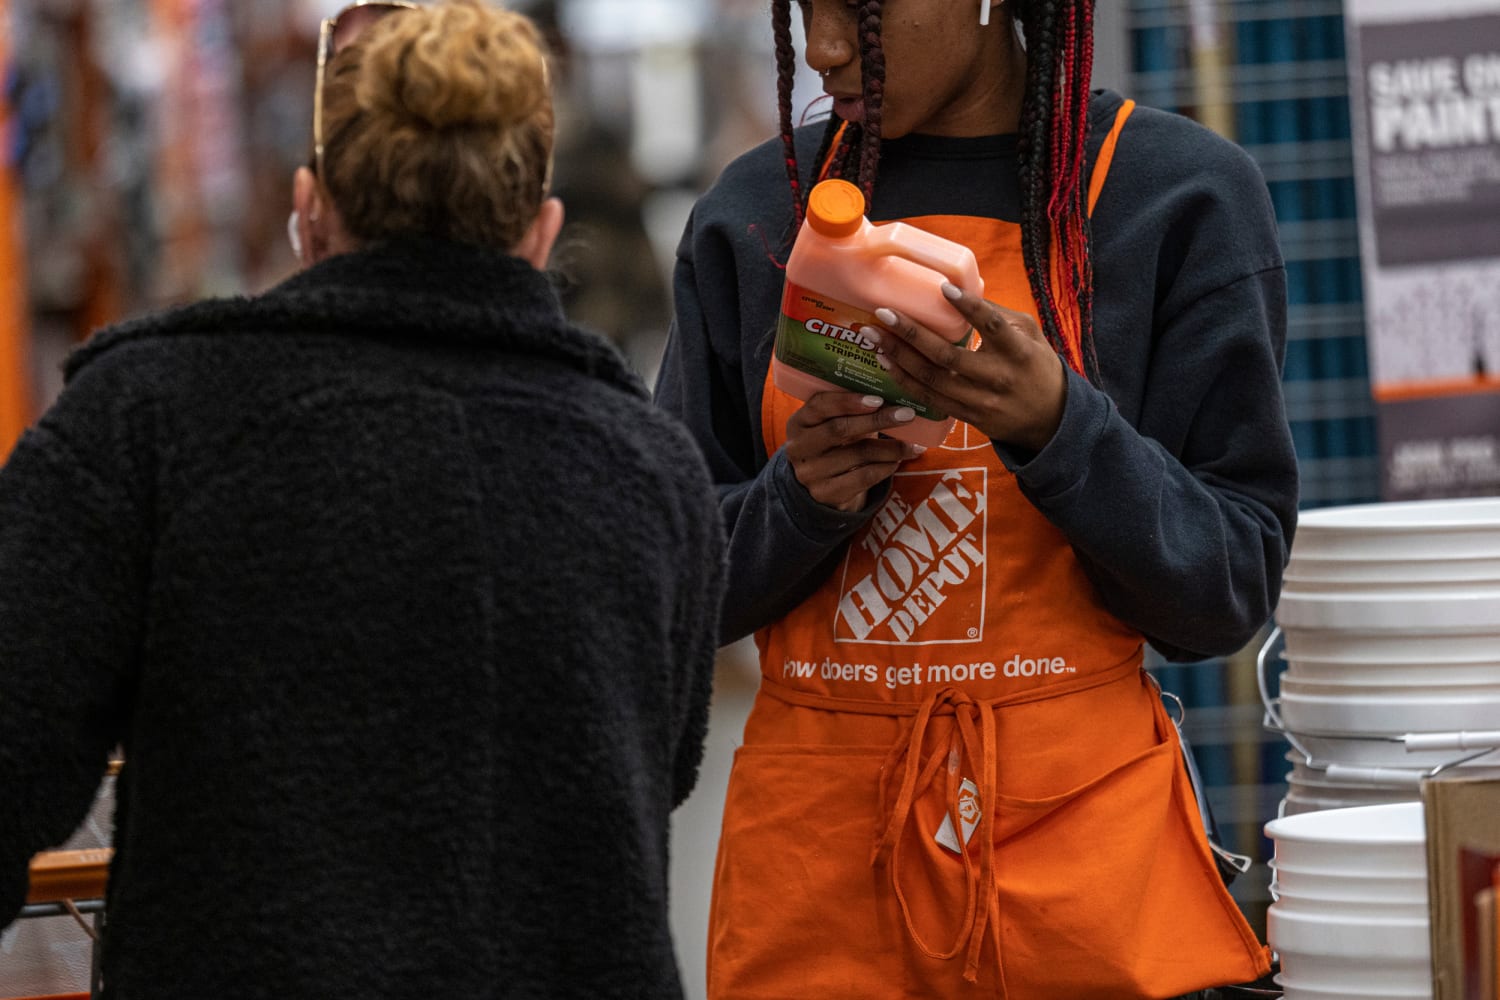 Home Depot raises starting hourly pay to $15 amid ongoing nationwide labor shortage